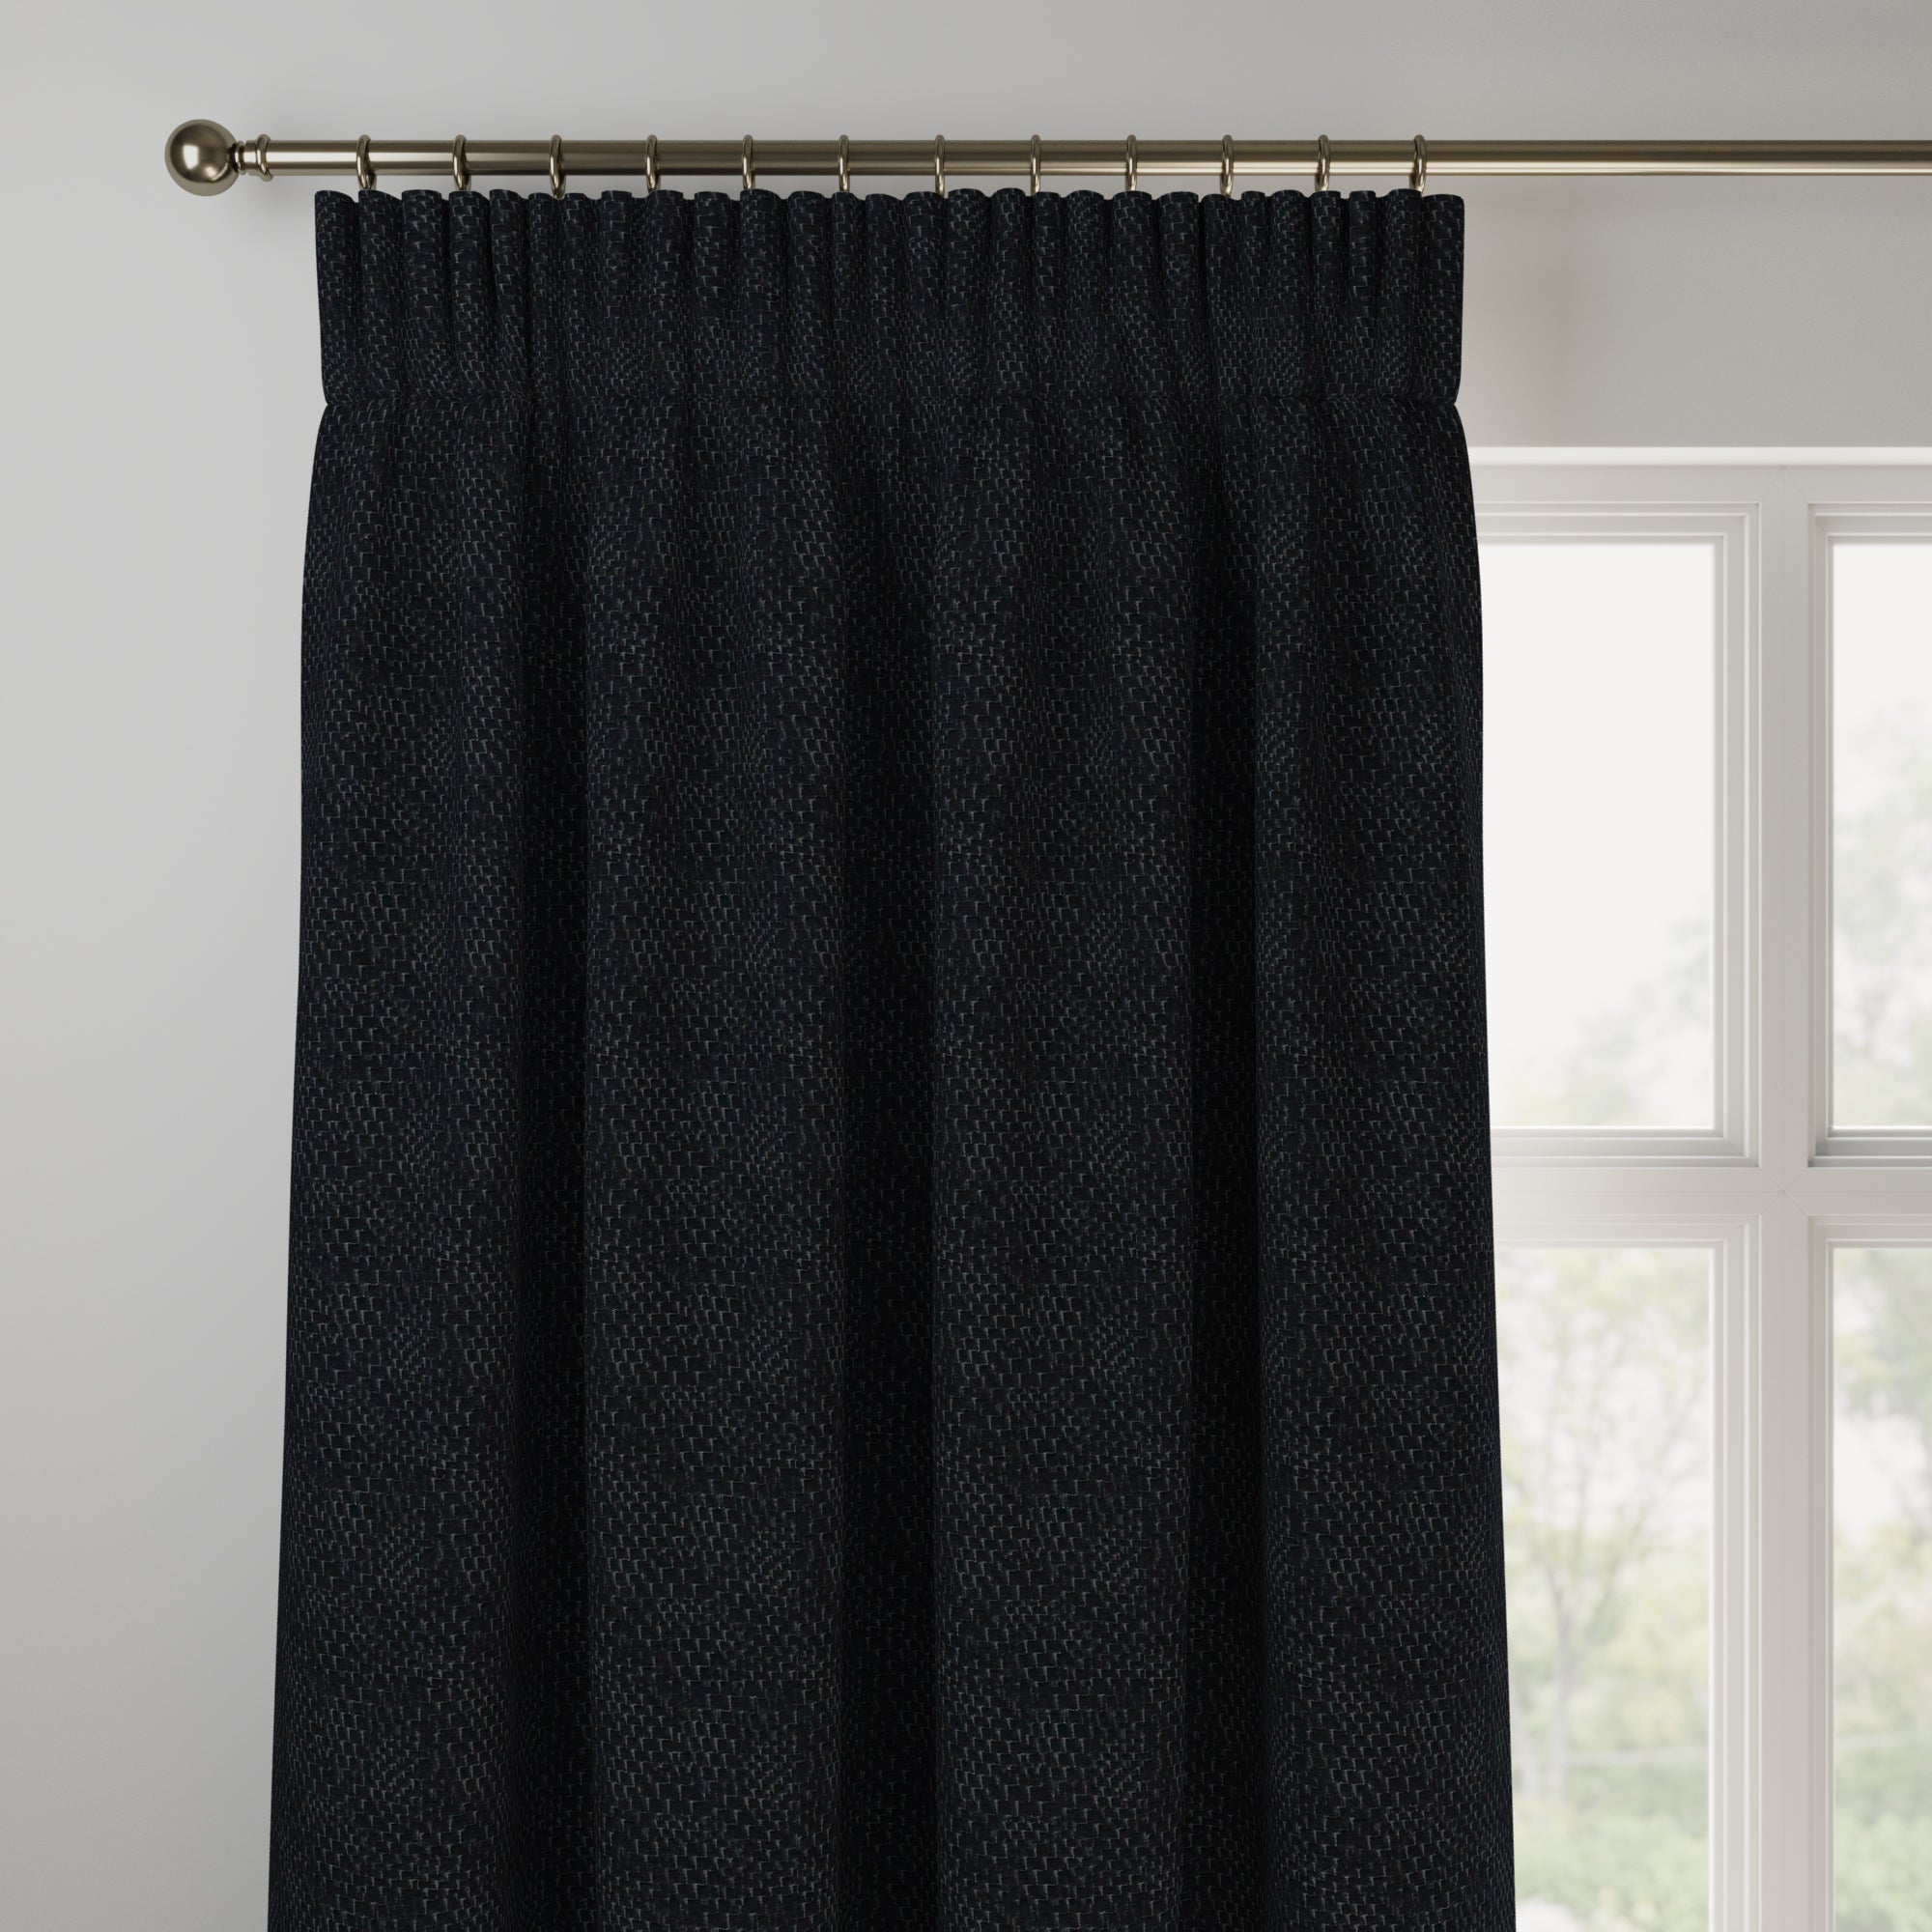 Marden Made to Measure Curtains Marden Ink